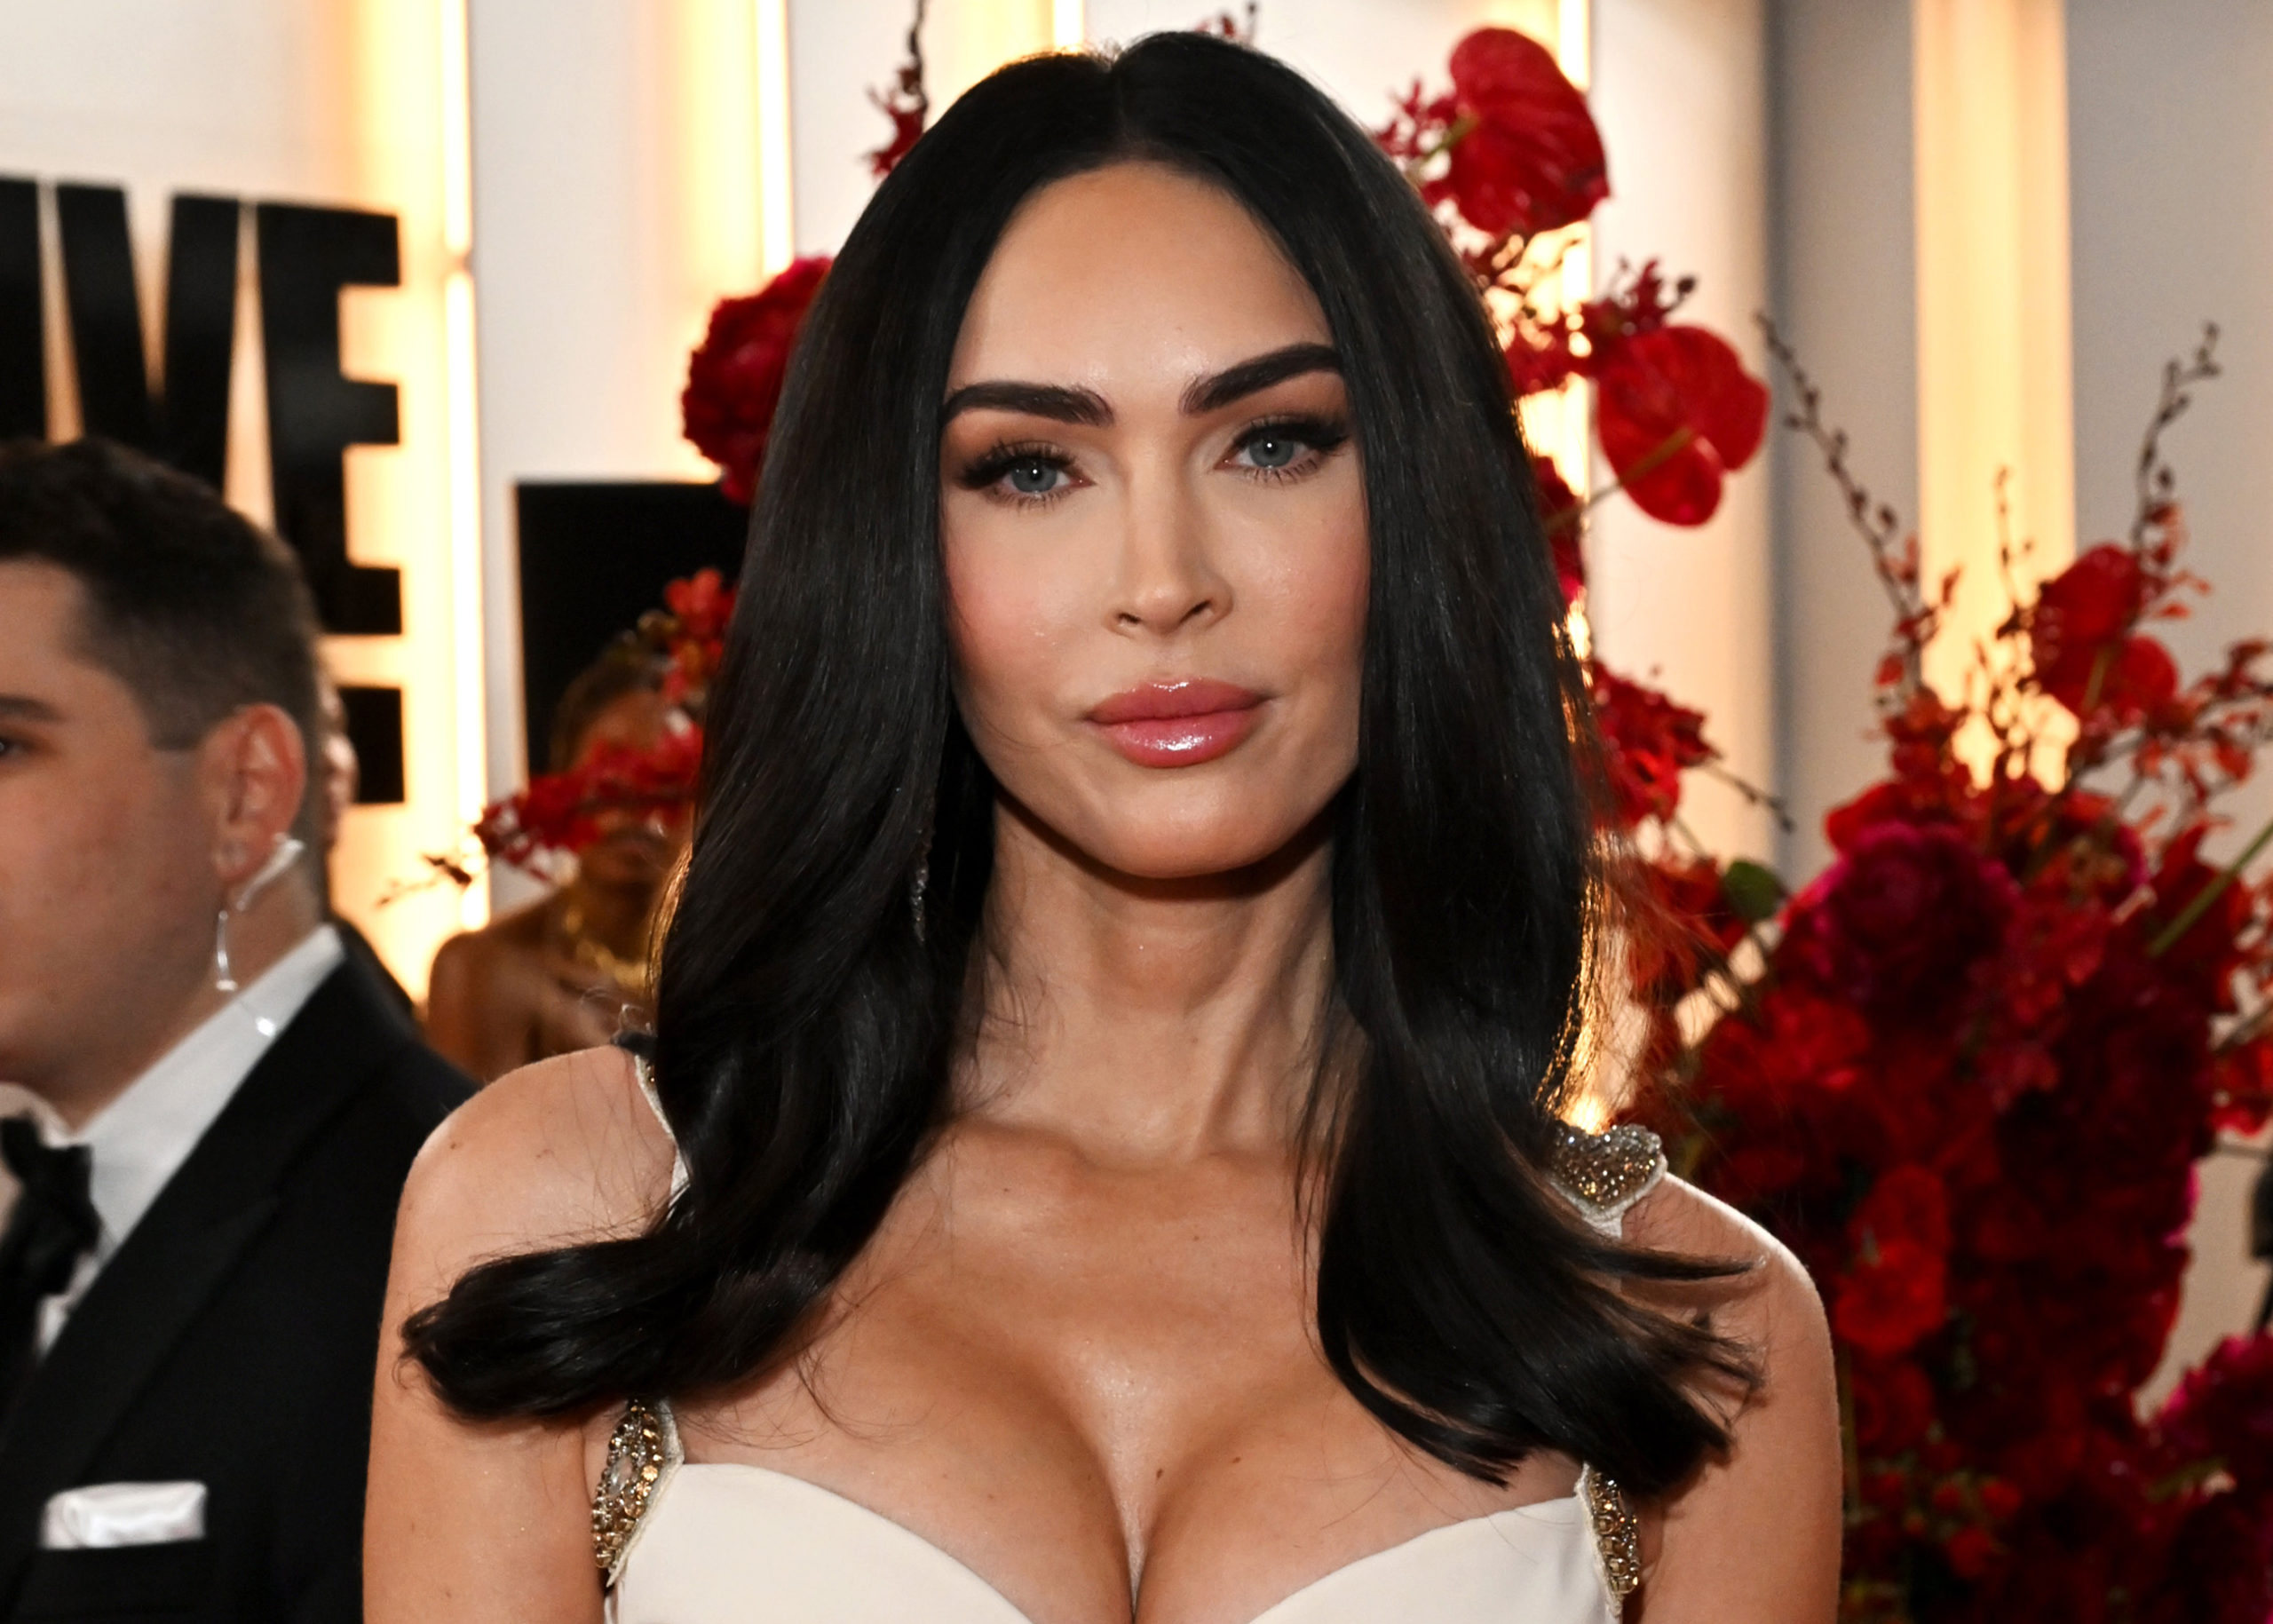 , The Lifting and Tightening Gel Megan Fox Used Before the Grammys